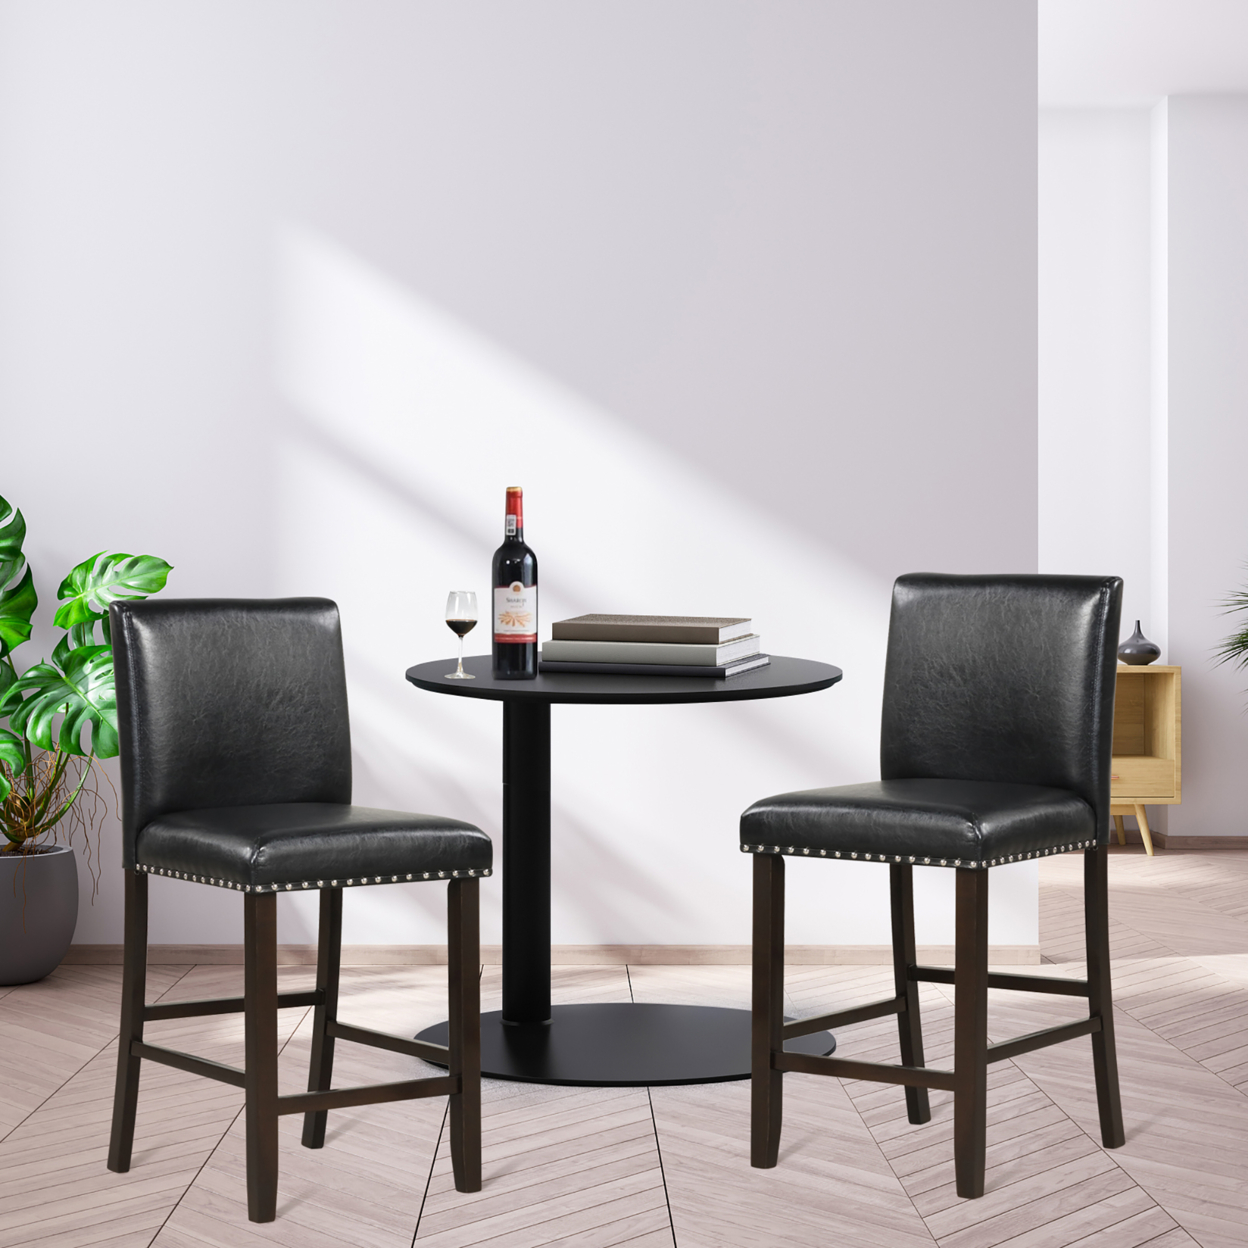 Set Of 2 Bar Stools PVC Leather Counter Height Chairs For Kitchen Island Black